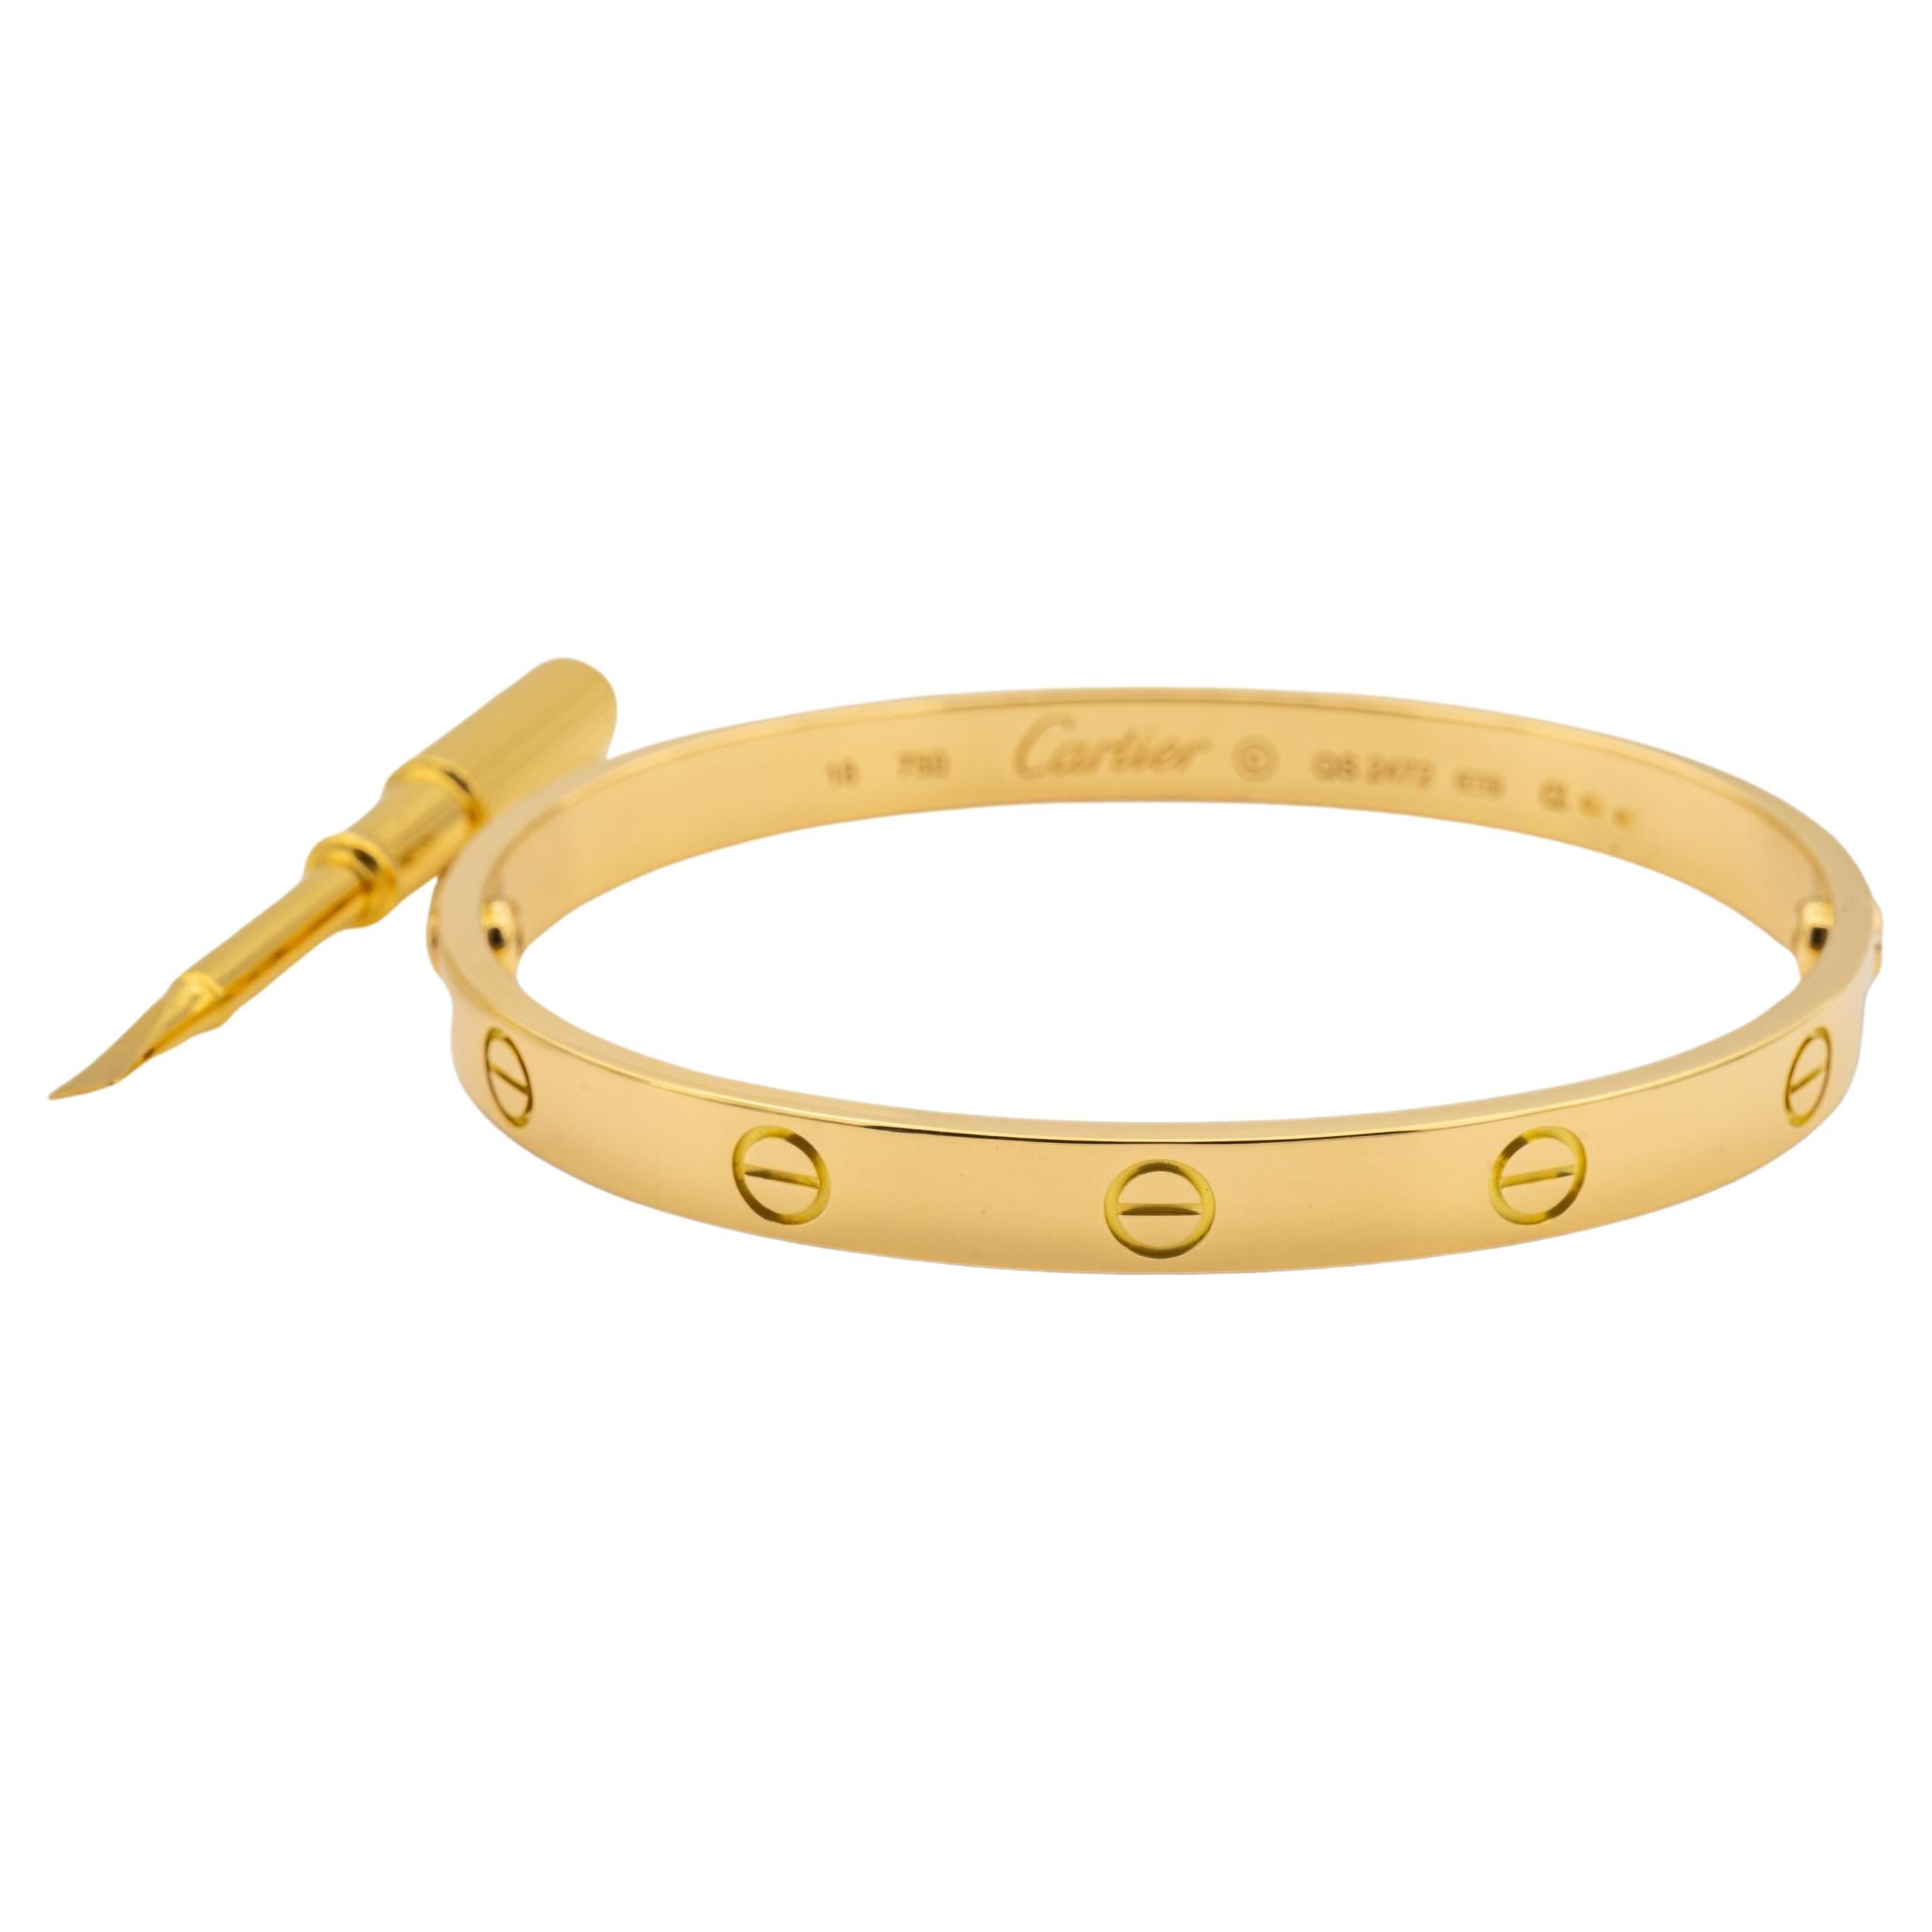 Cartier Love 18K Yellow Gold Bangle Bracelet with Cert and Receipt